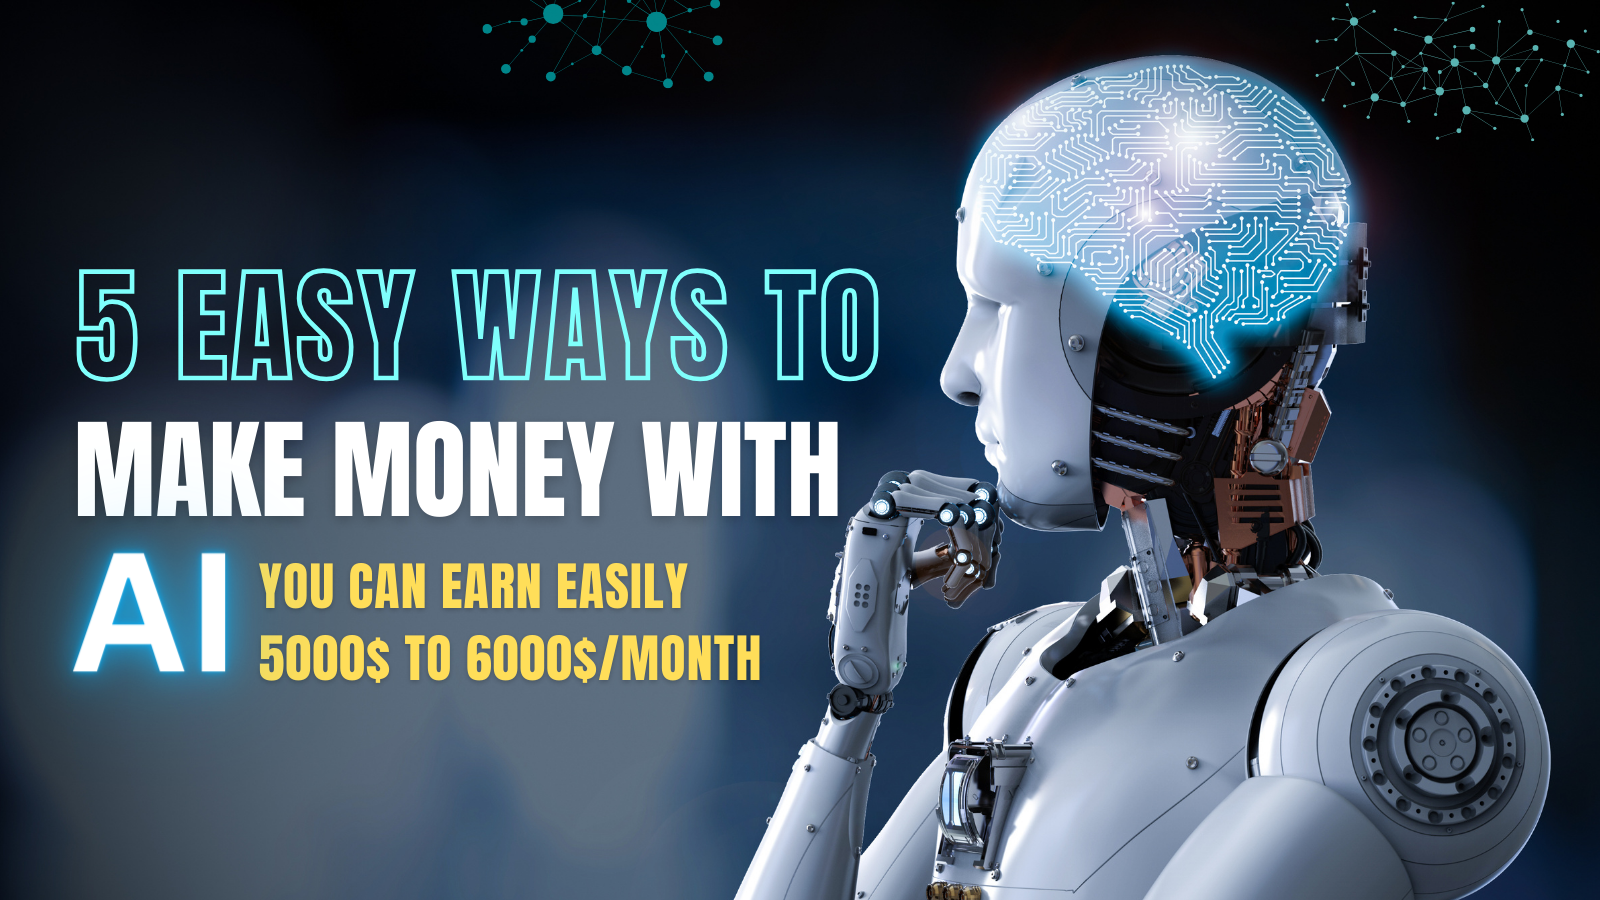 5 Easy Ways to Make Money with AI (Easily Earn 5K$ to 6K$)